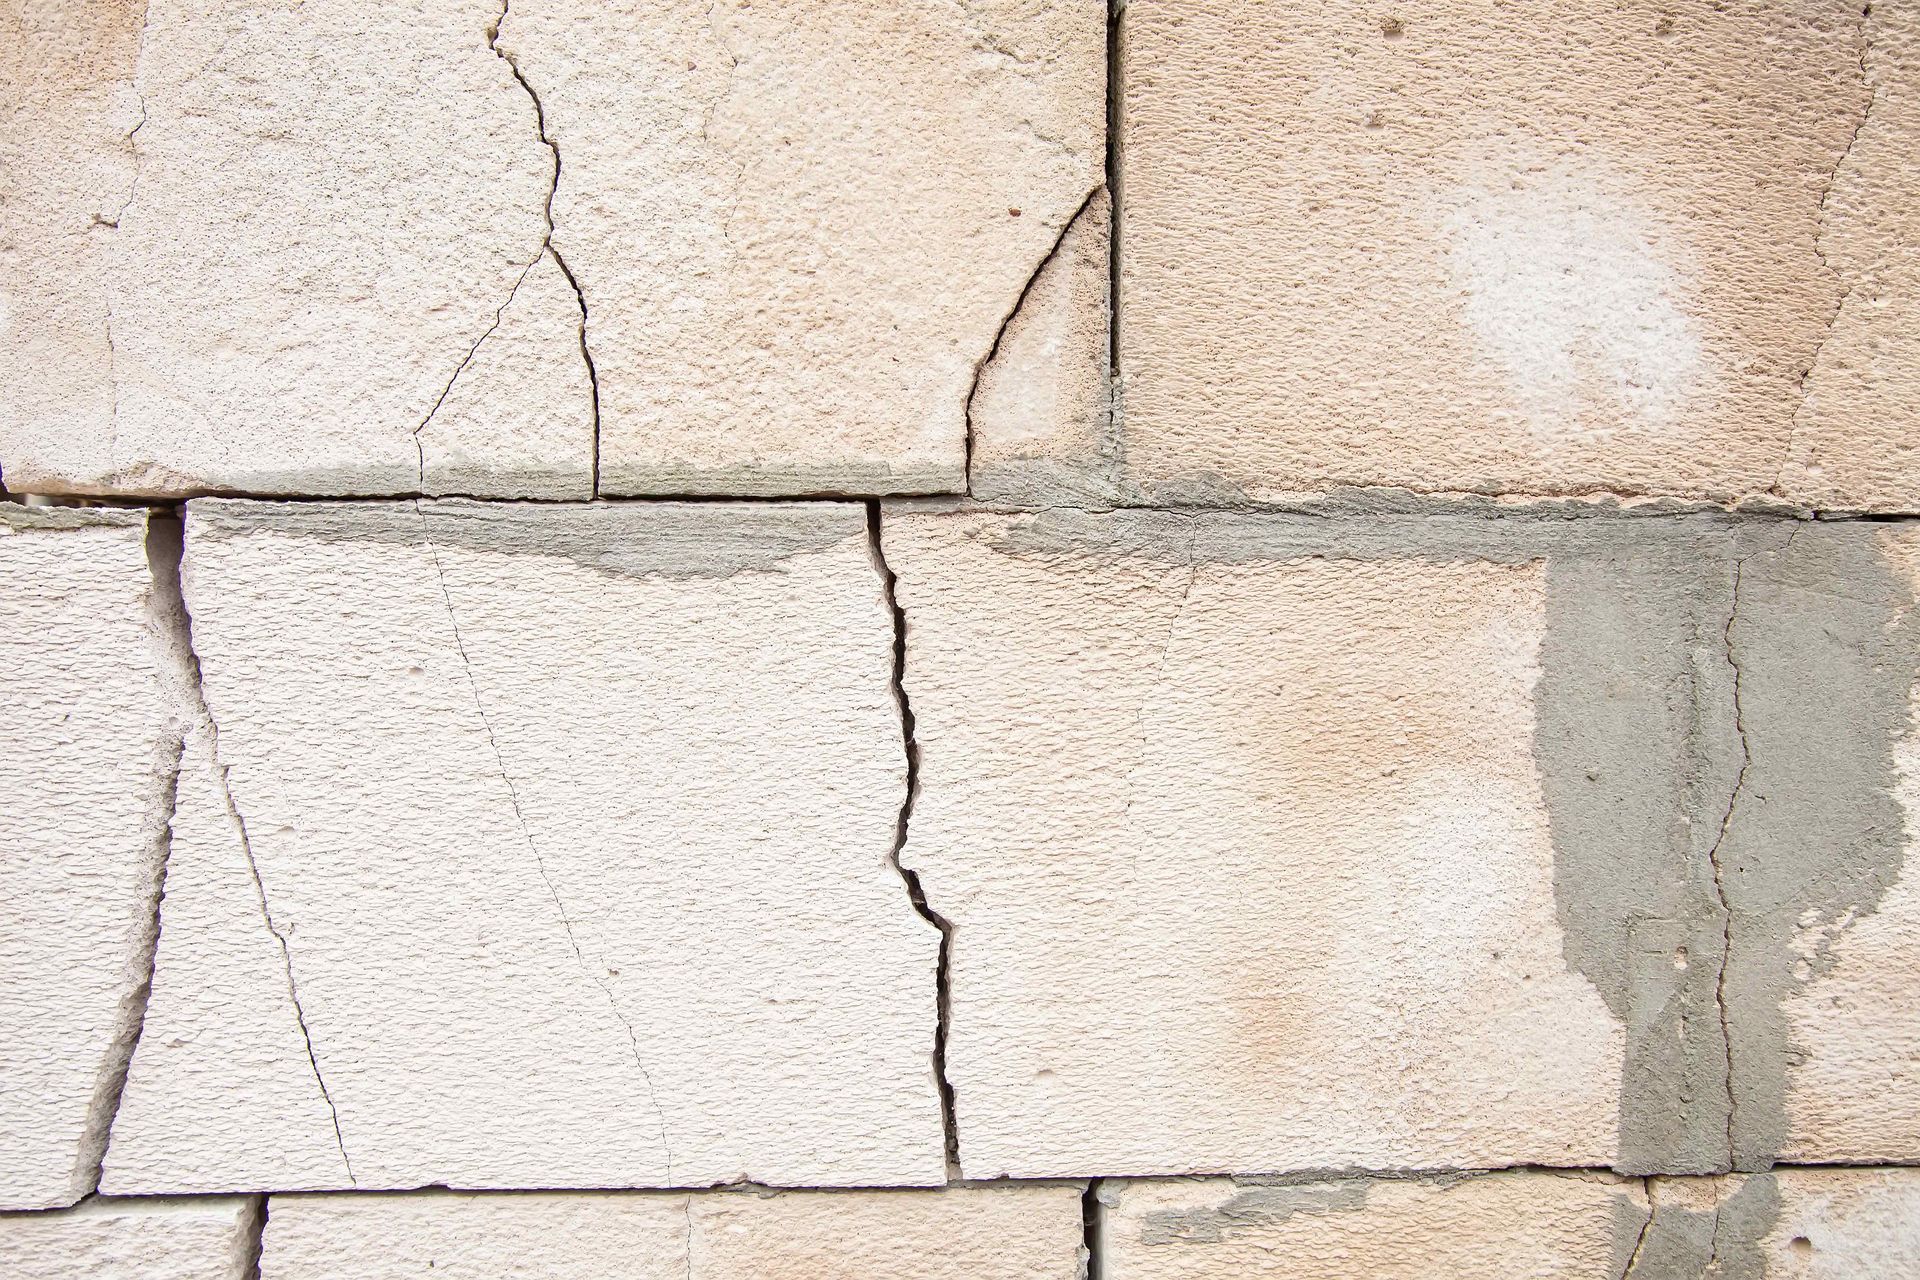 Stairstep cracks in a block foundation wall.